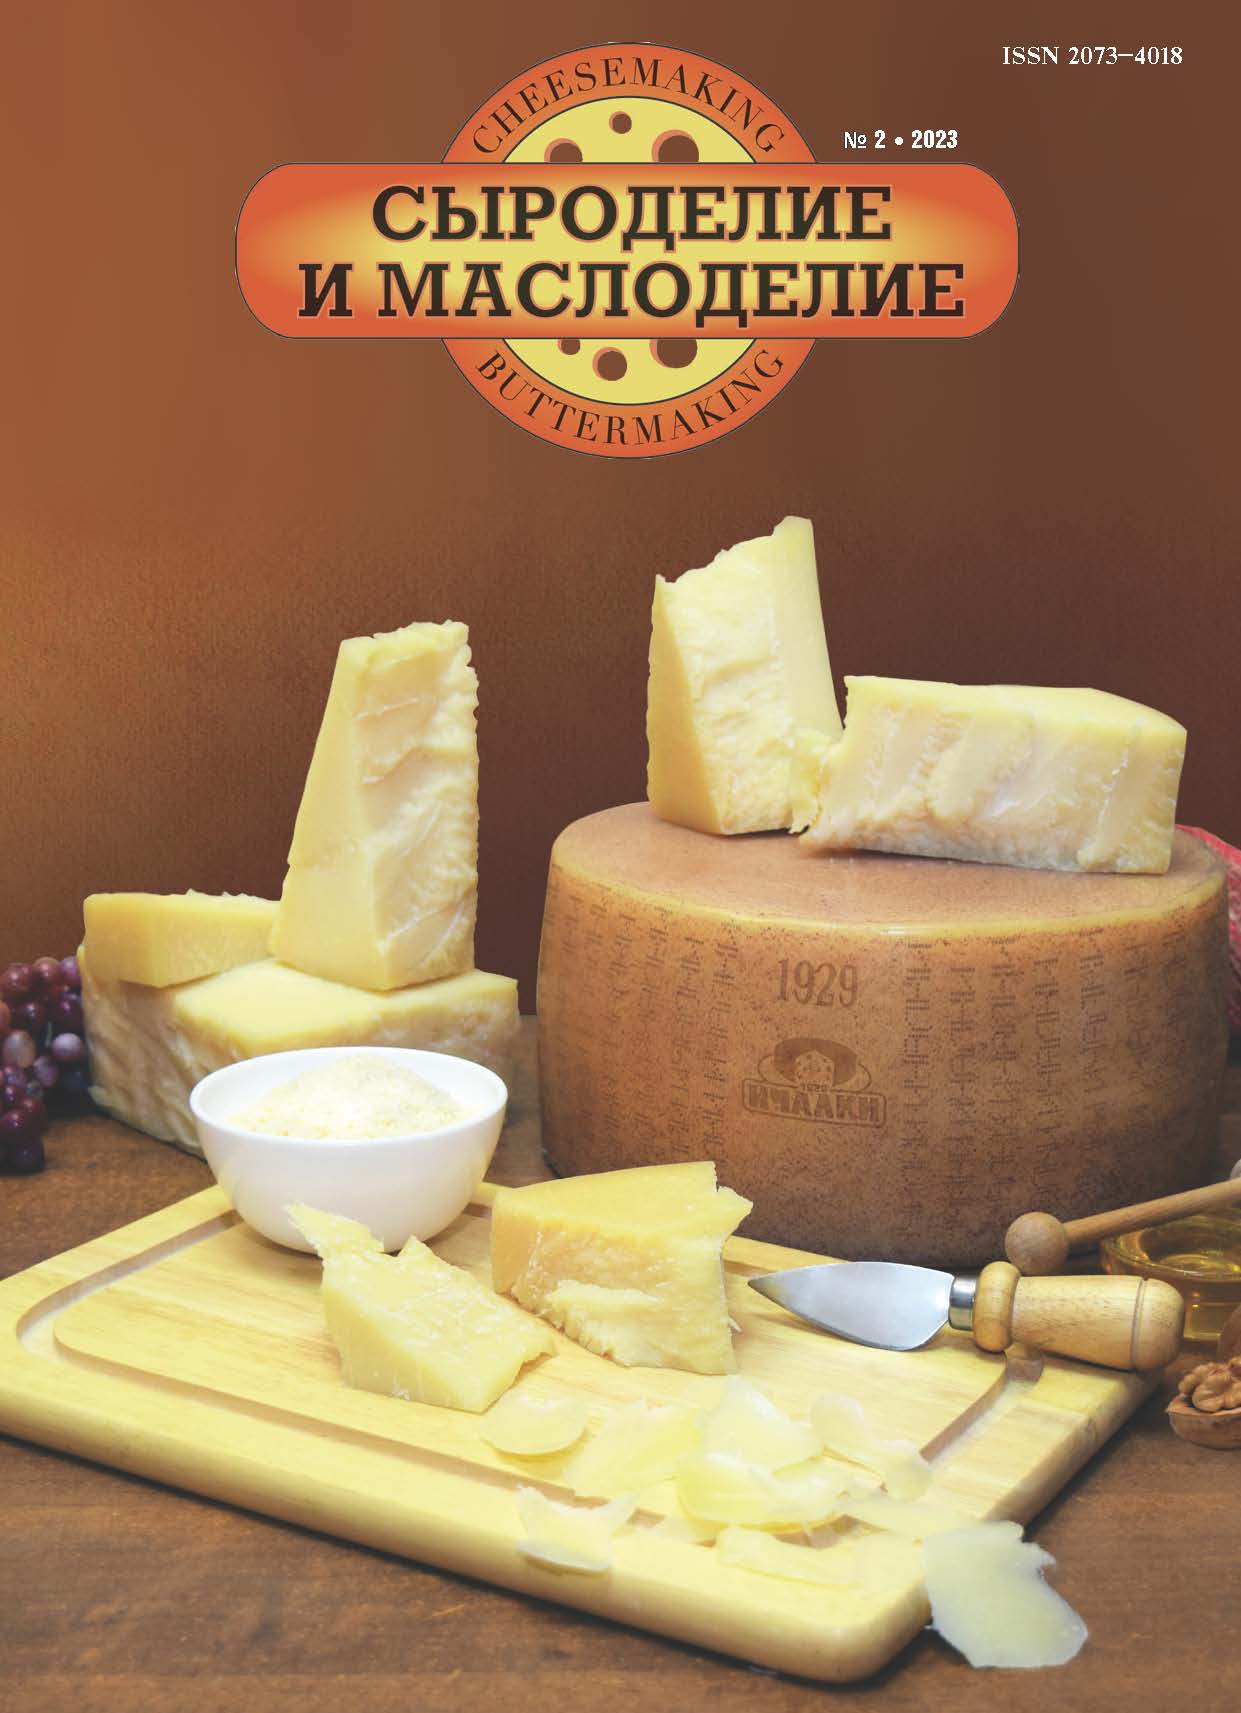                         Investigation of the possibility of using sedimentary milk molasses in the production of soft cheeses
            